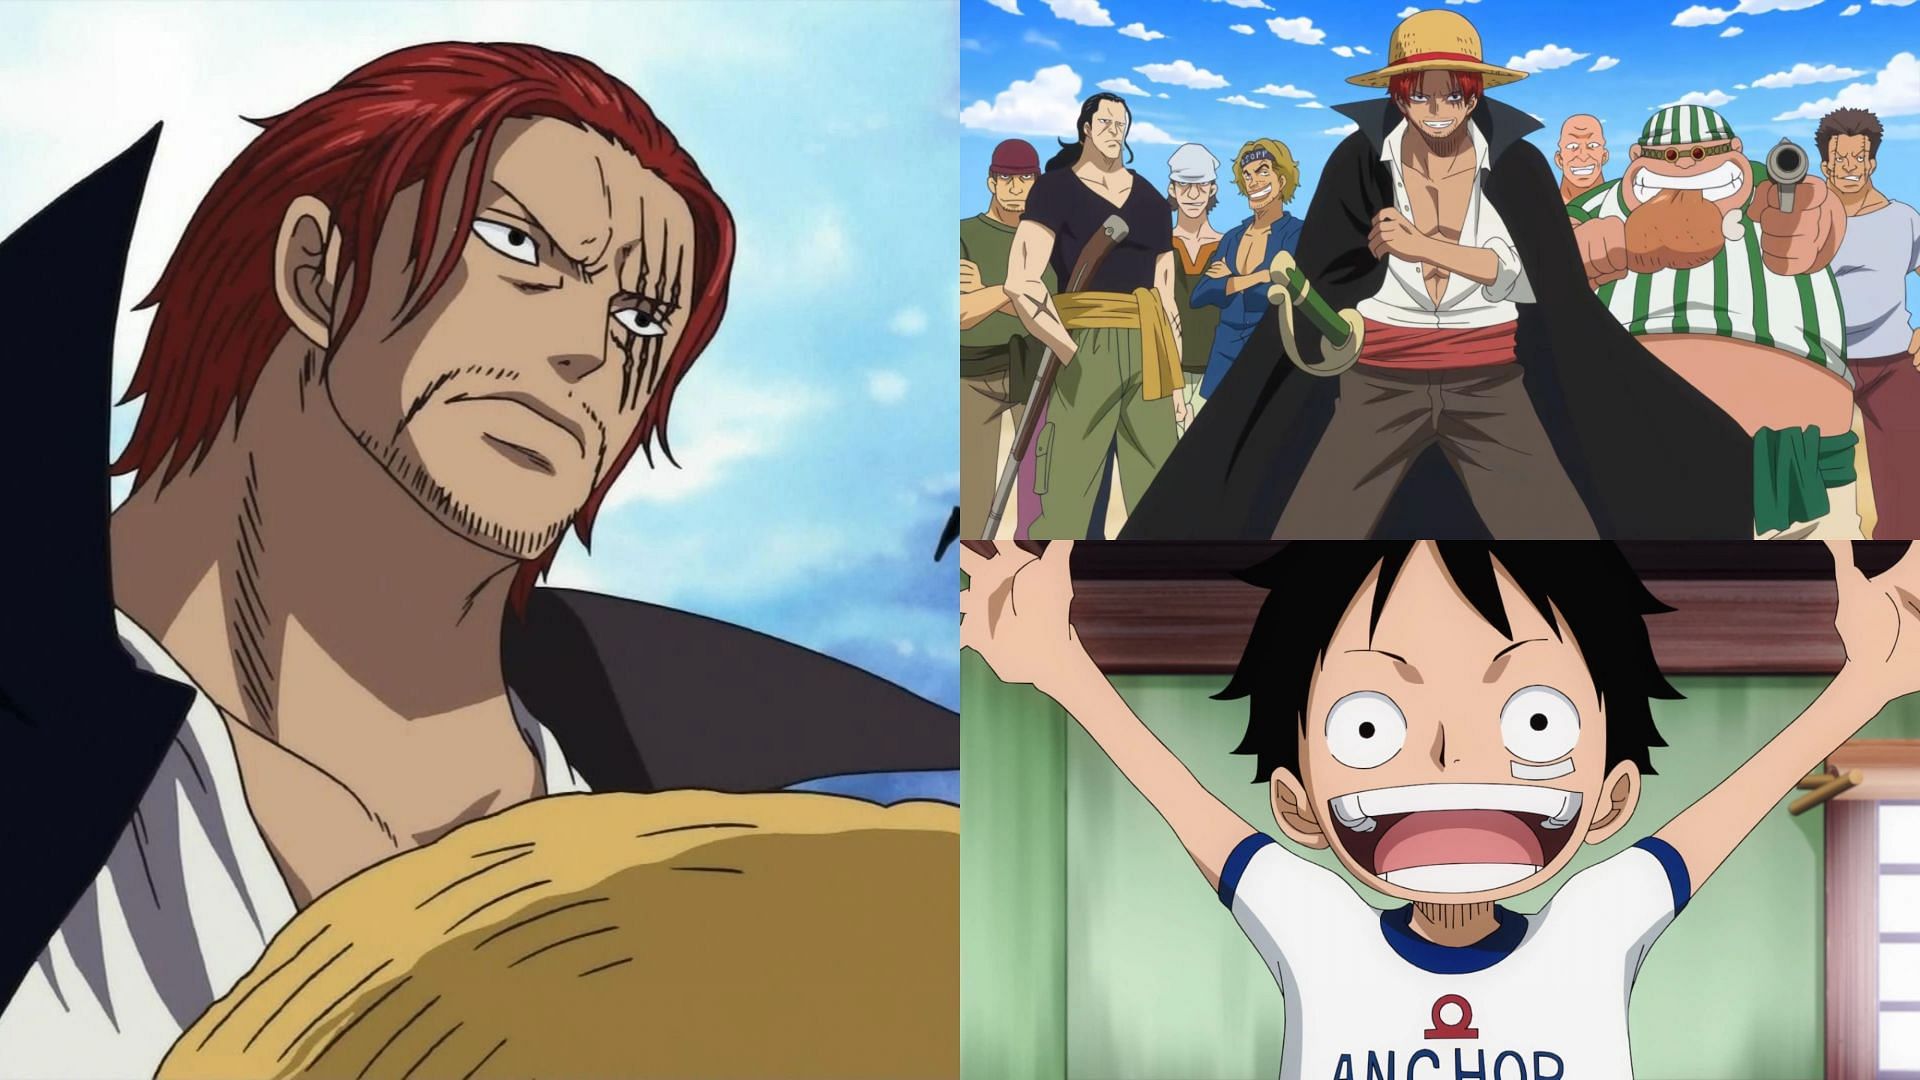 One Piece Special Episode 4 reminds fans of Shanks best moments (Image via Toei Animation)